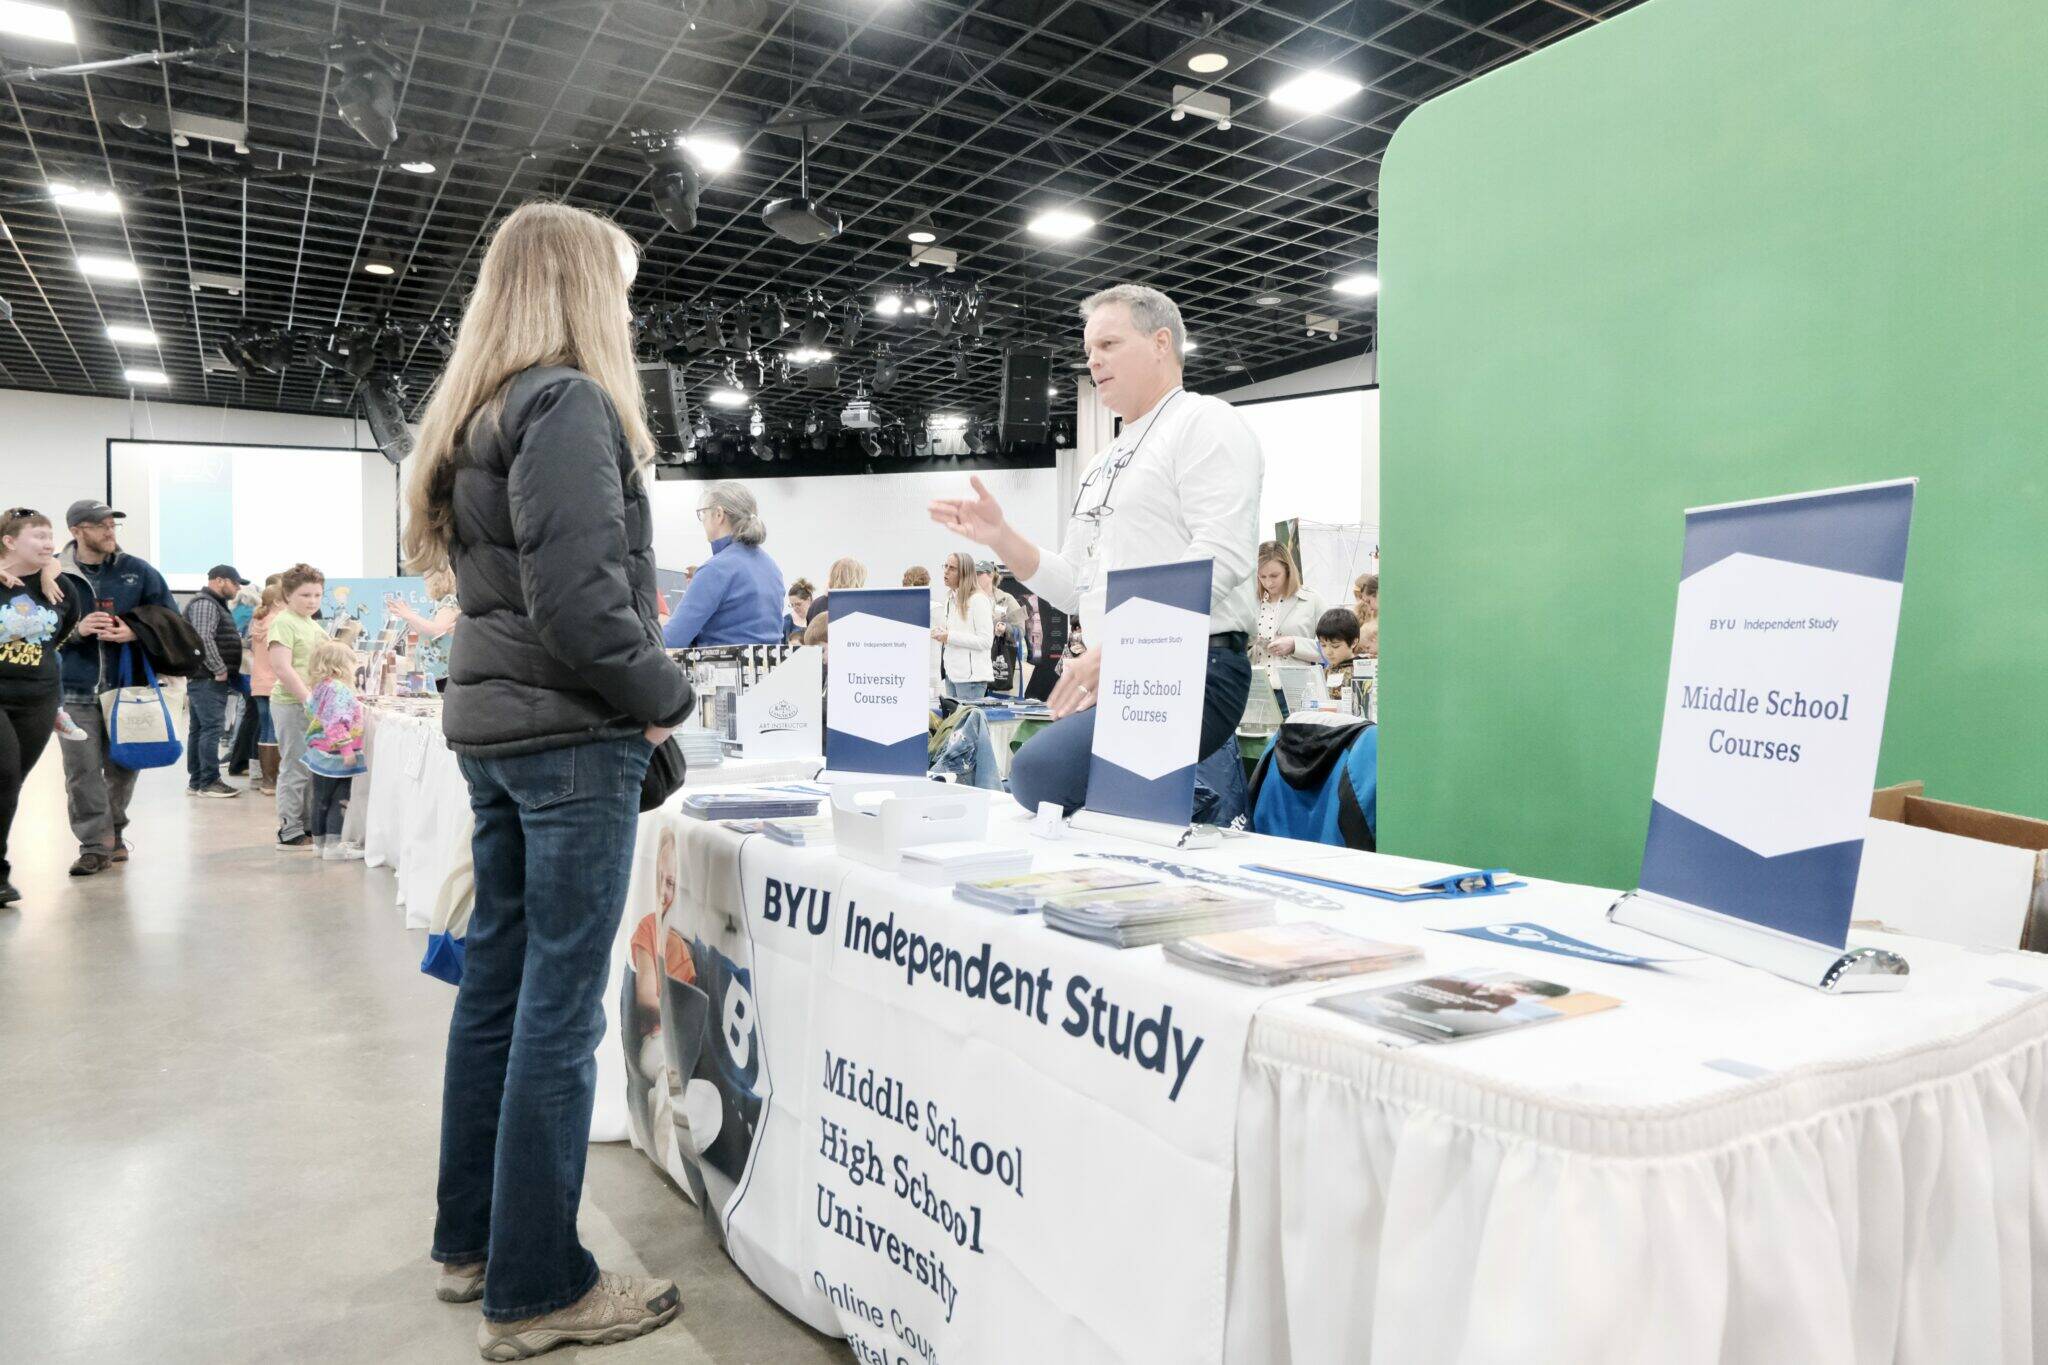 Dave Hoffman sells materials for Brigham Young University, a private religious college, at the IDEA Homeschool Curriculum Fair in Anchorage on April 18. (Claire Stremple/Alaska Beacon)